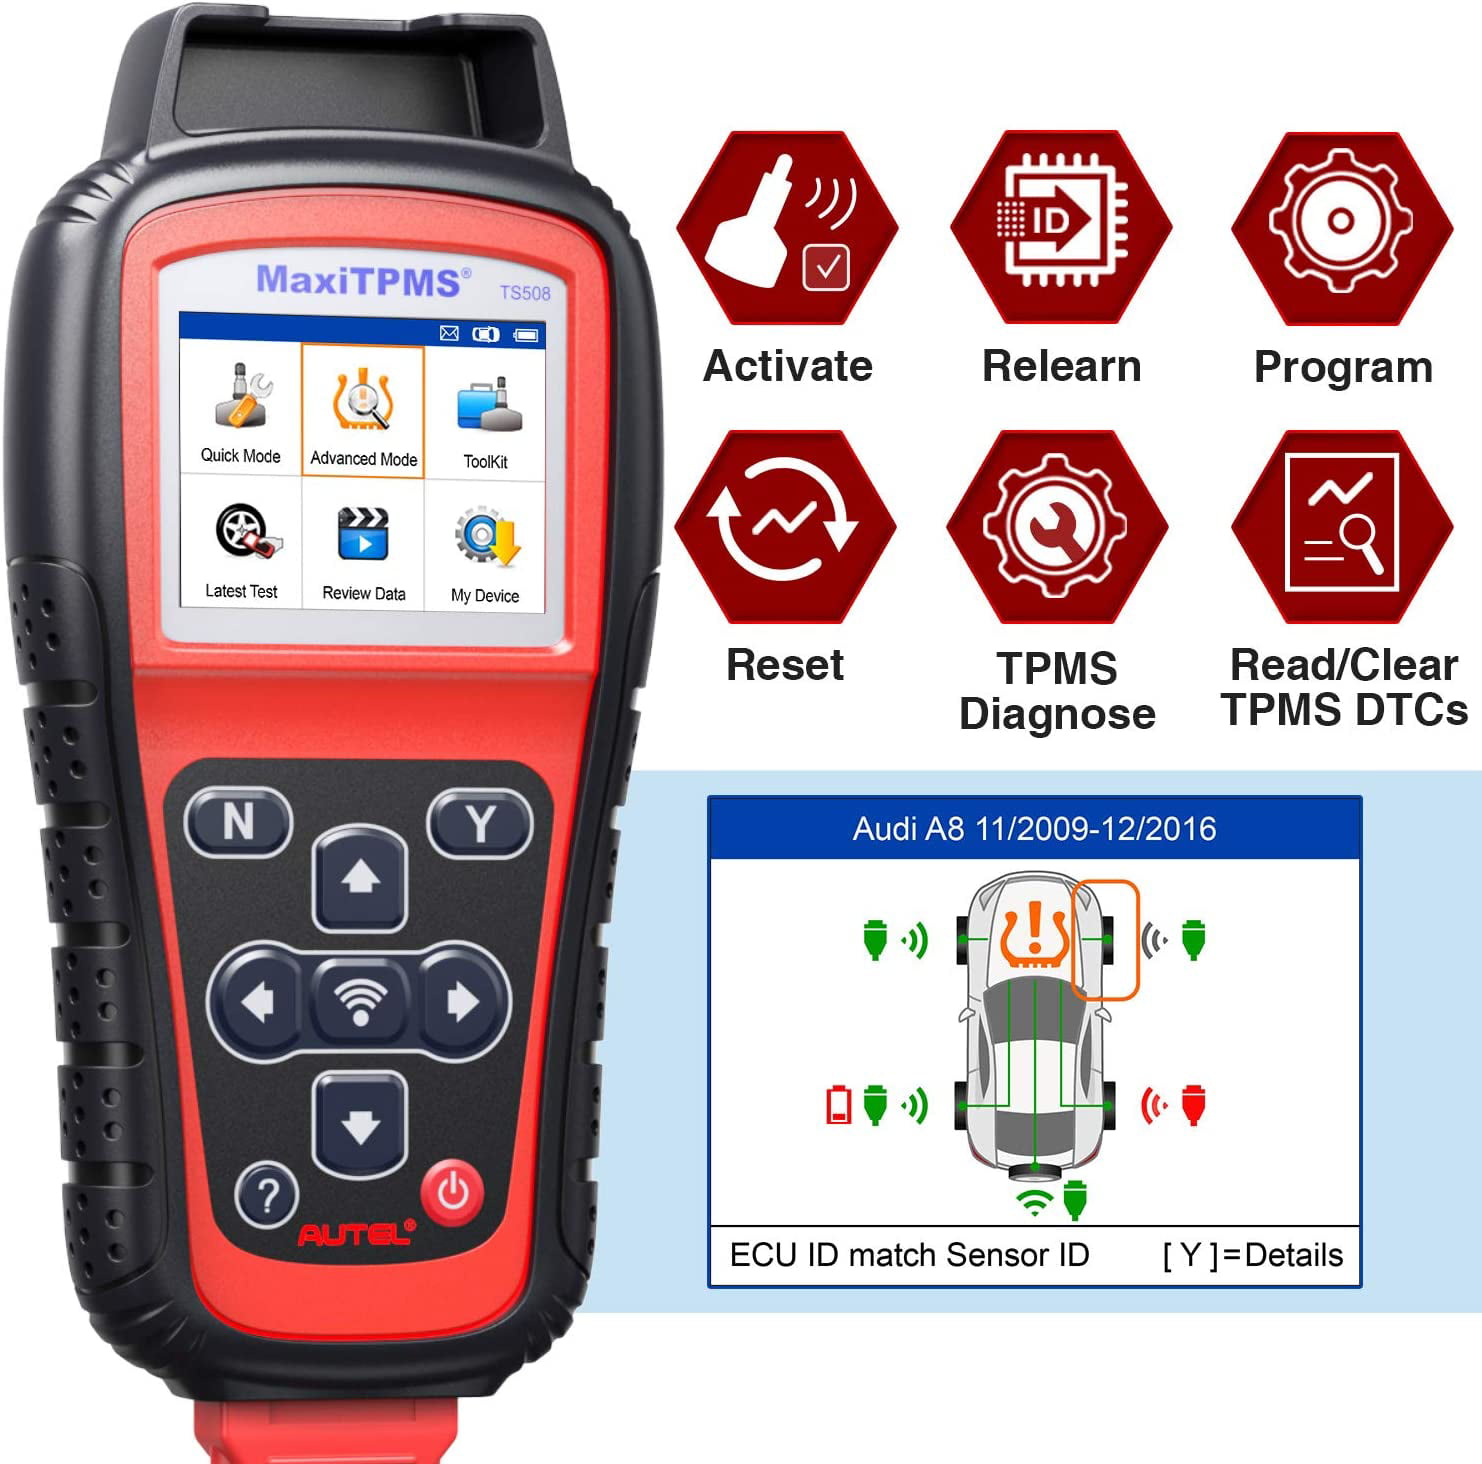 Autel MaxiTPMS TS508 TPMS Relearn Tool 2021 Newest Free Update Activate/Relearn All Brand Sensors 4 Modes to Program MX-Sersors 315/433MHz Upgraded Version of TS501/TS408 with Quick/Advanced Mode 